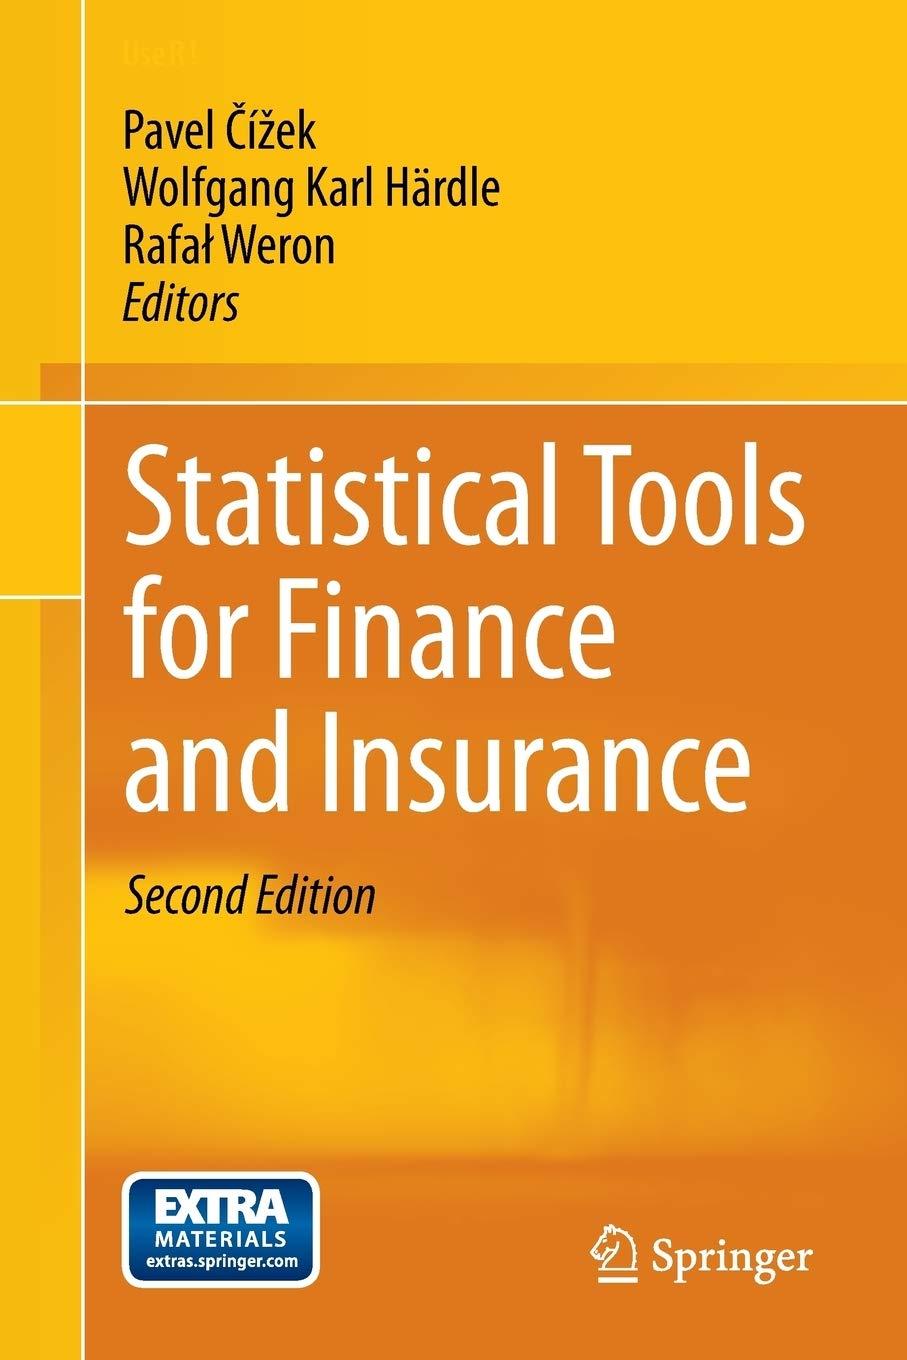 statistical tools for finance and insurance 2nd edition pavel cizek, wolfgang karl härdle, rafał weron